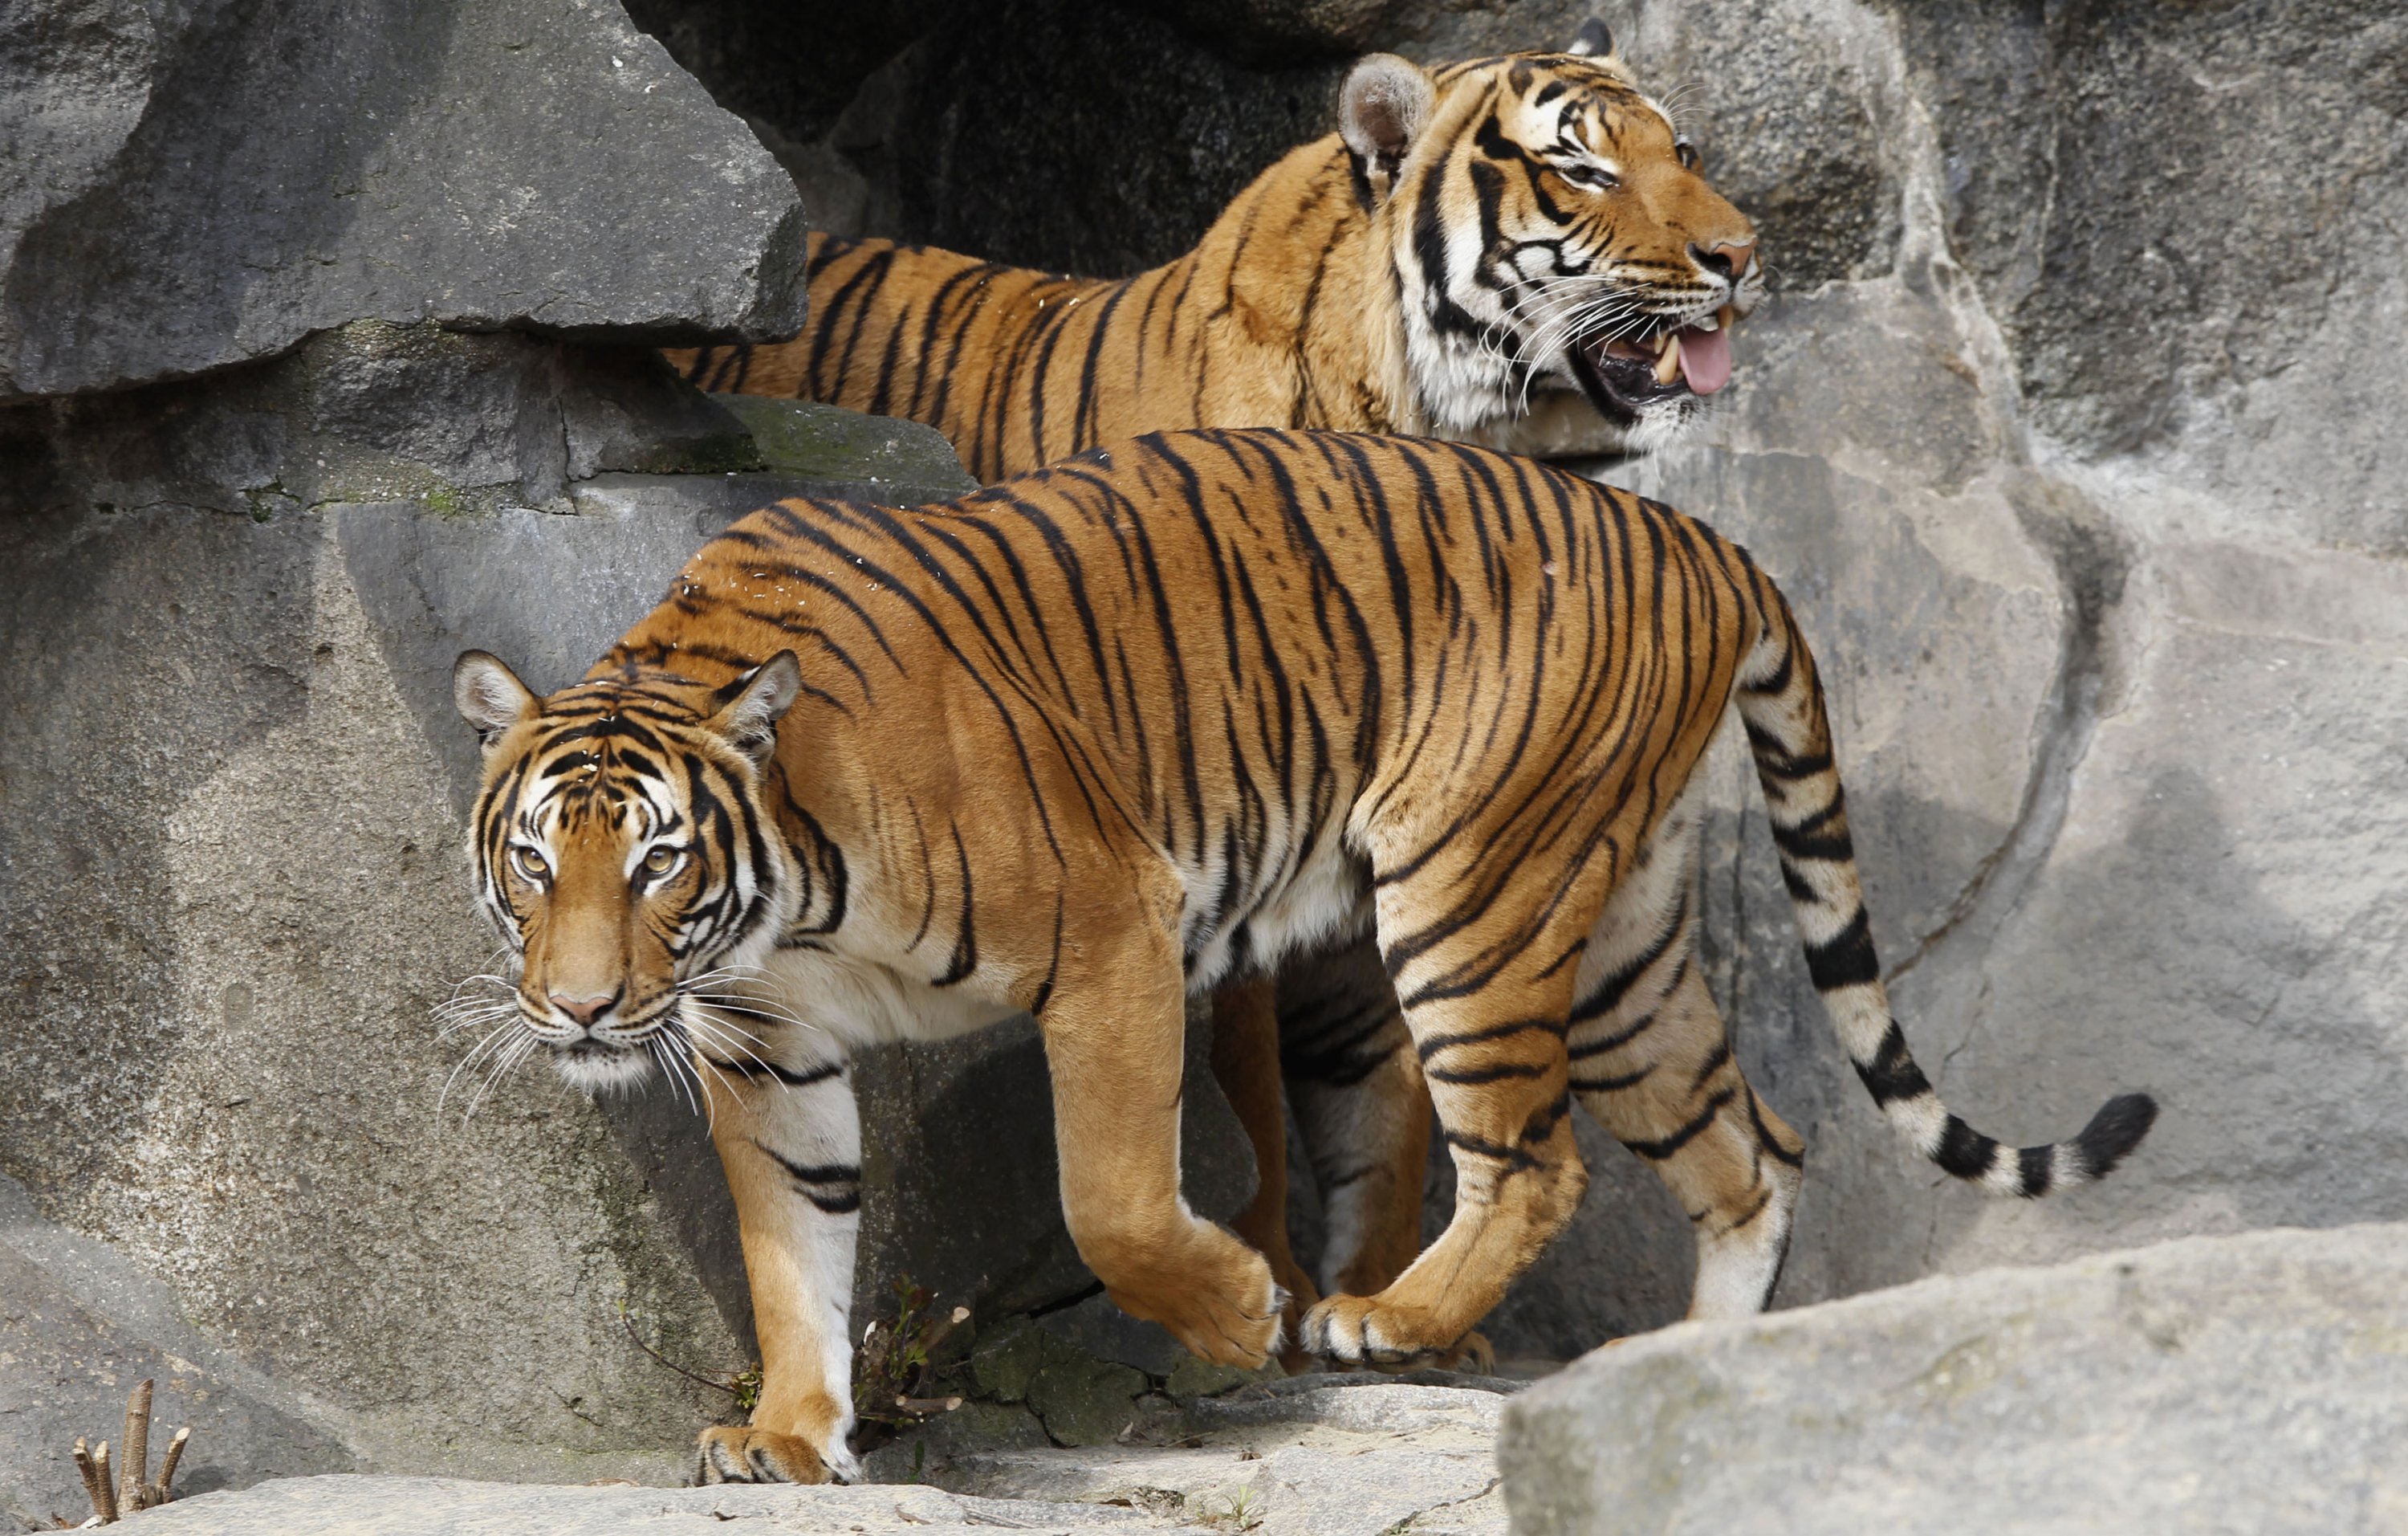 Full Indochinese Tiger Information